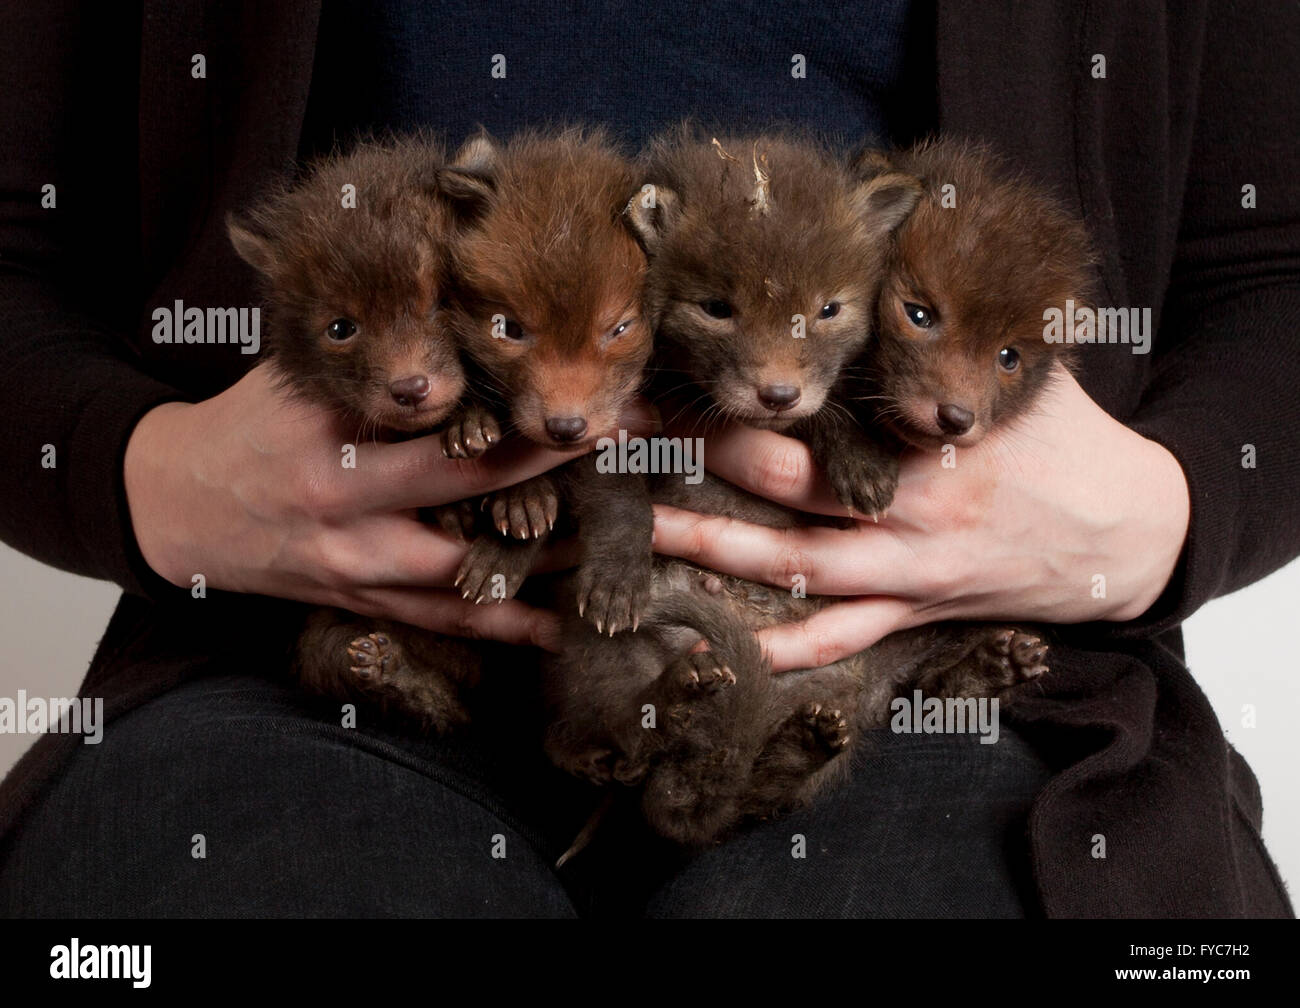 Orphaned red fox cubs in hand, studio shot Stock Photo